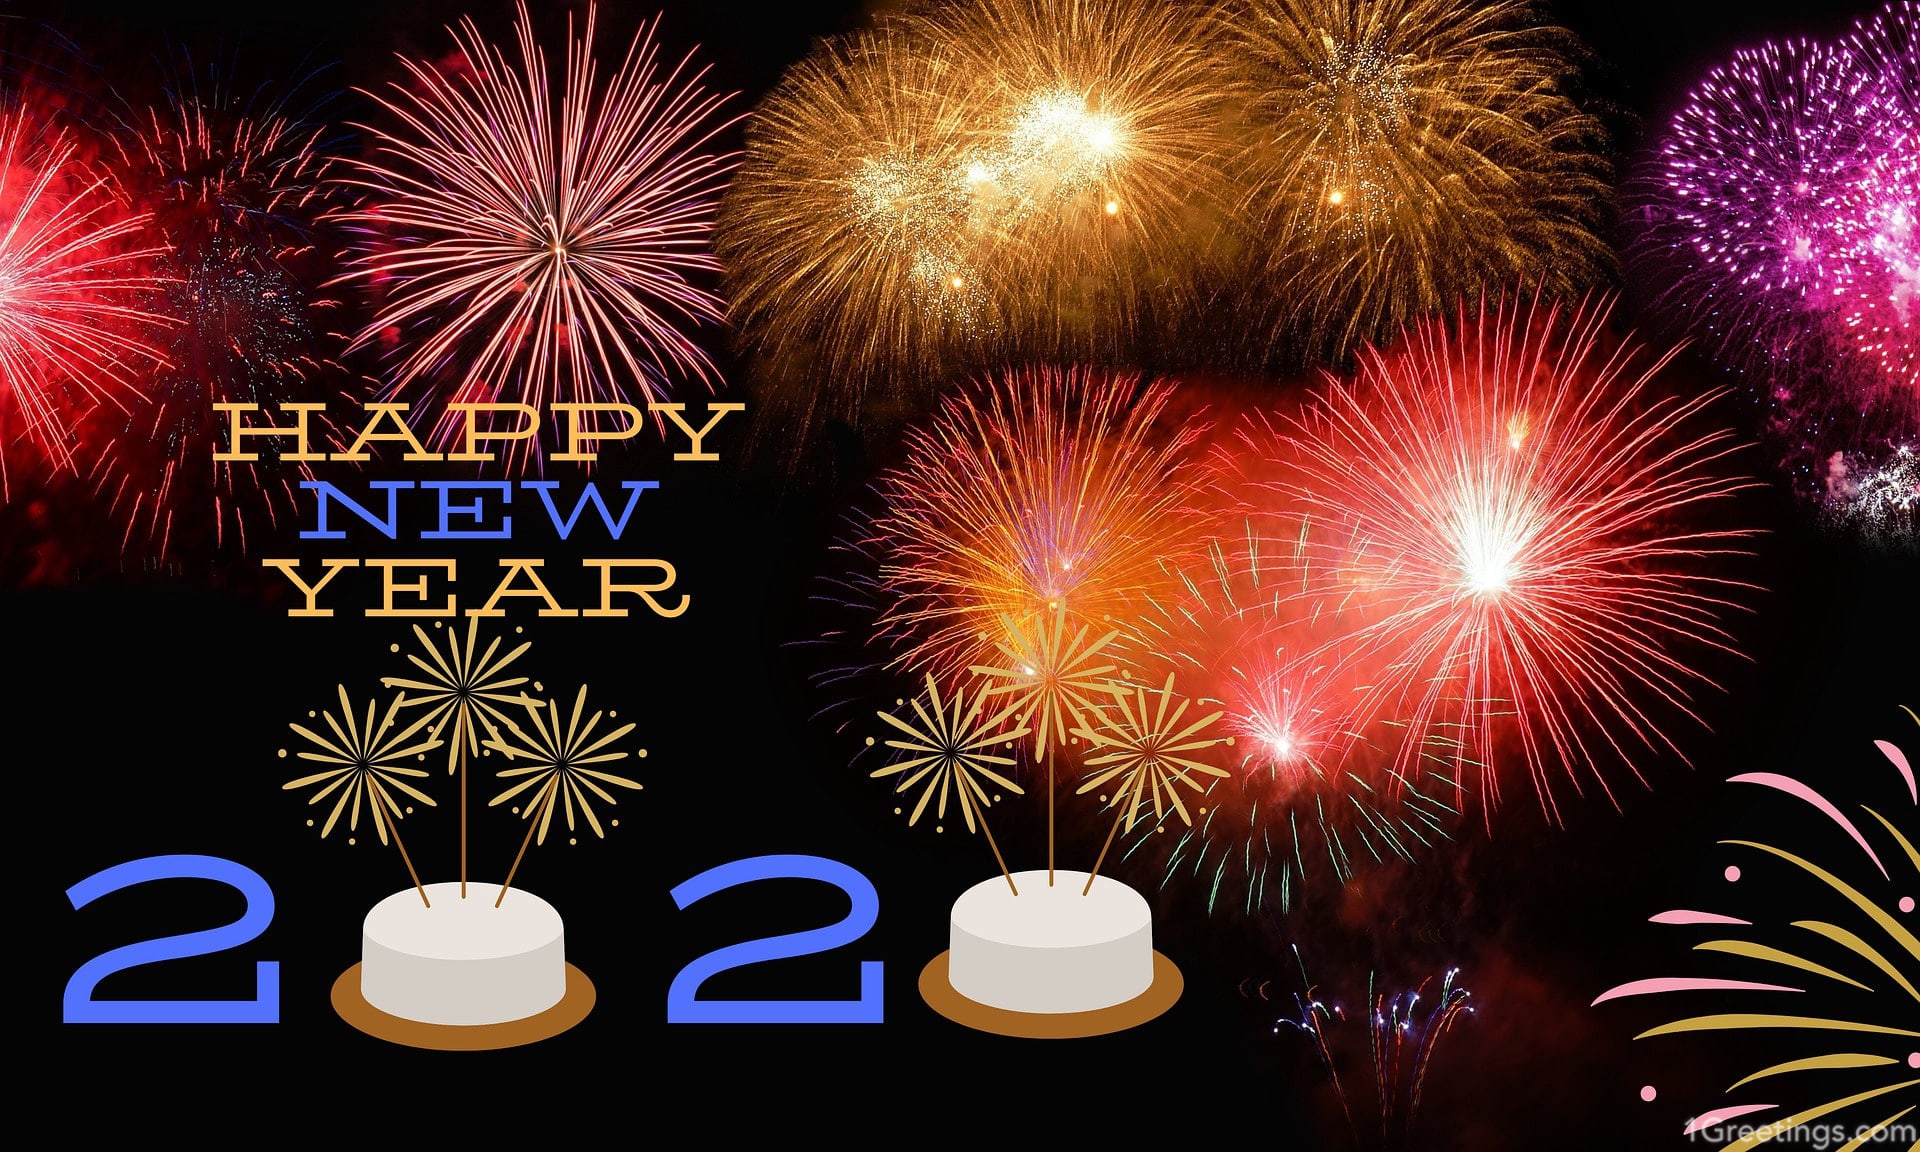 Download happy new year 2020 wallpaper with fireworks